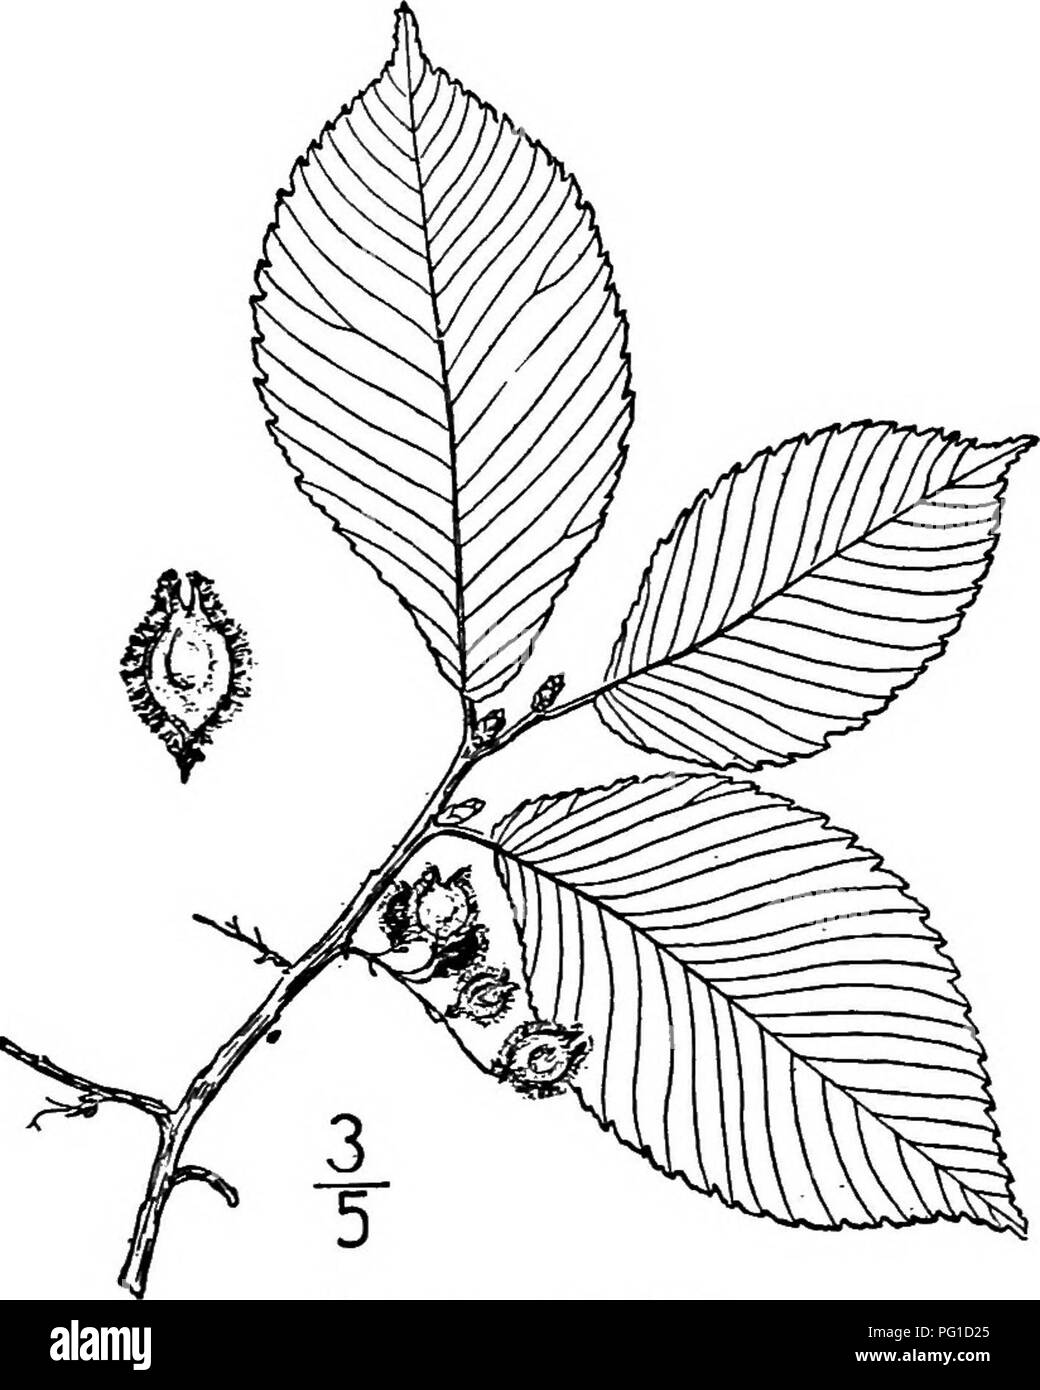 . North American trees : being descriptions and illustrations of the trees growing independently of cultivation in North America, north of Mexico and the West Indies . Trees. 346 The Elms and often doubly toothed, very rough and dark green on the upper surface, and hairy on the lower, small, 5 cm. long or less, with hairy stalks 2 to 4 mm. long; the stipules are prominent on the yoimg leaves, sometimes i cm. long, but fall away early. The flowers appear id the autunm, in small short-stalked clusters in the leaf-axils; the calyx is deeply cleft into narrow lobes, about as long as the hairy ovar Stock Photo